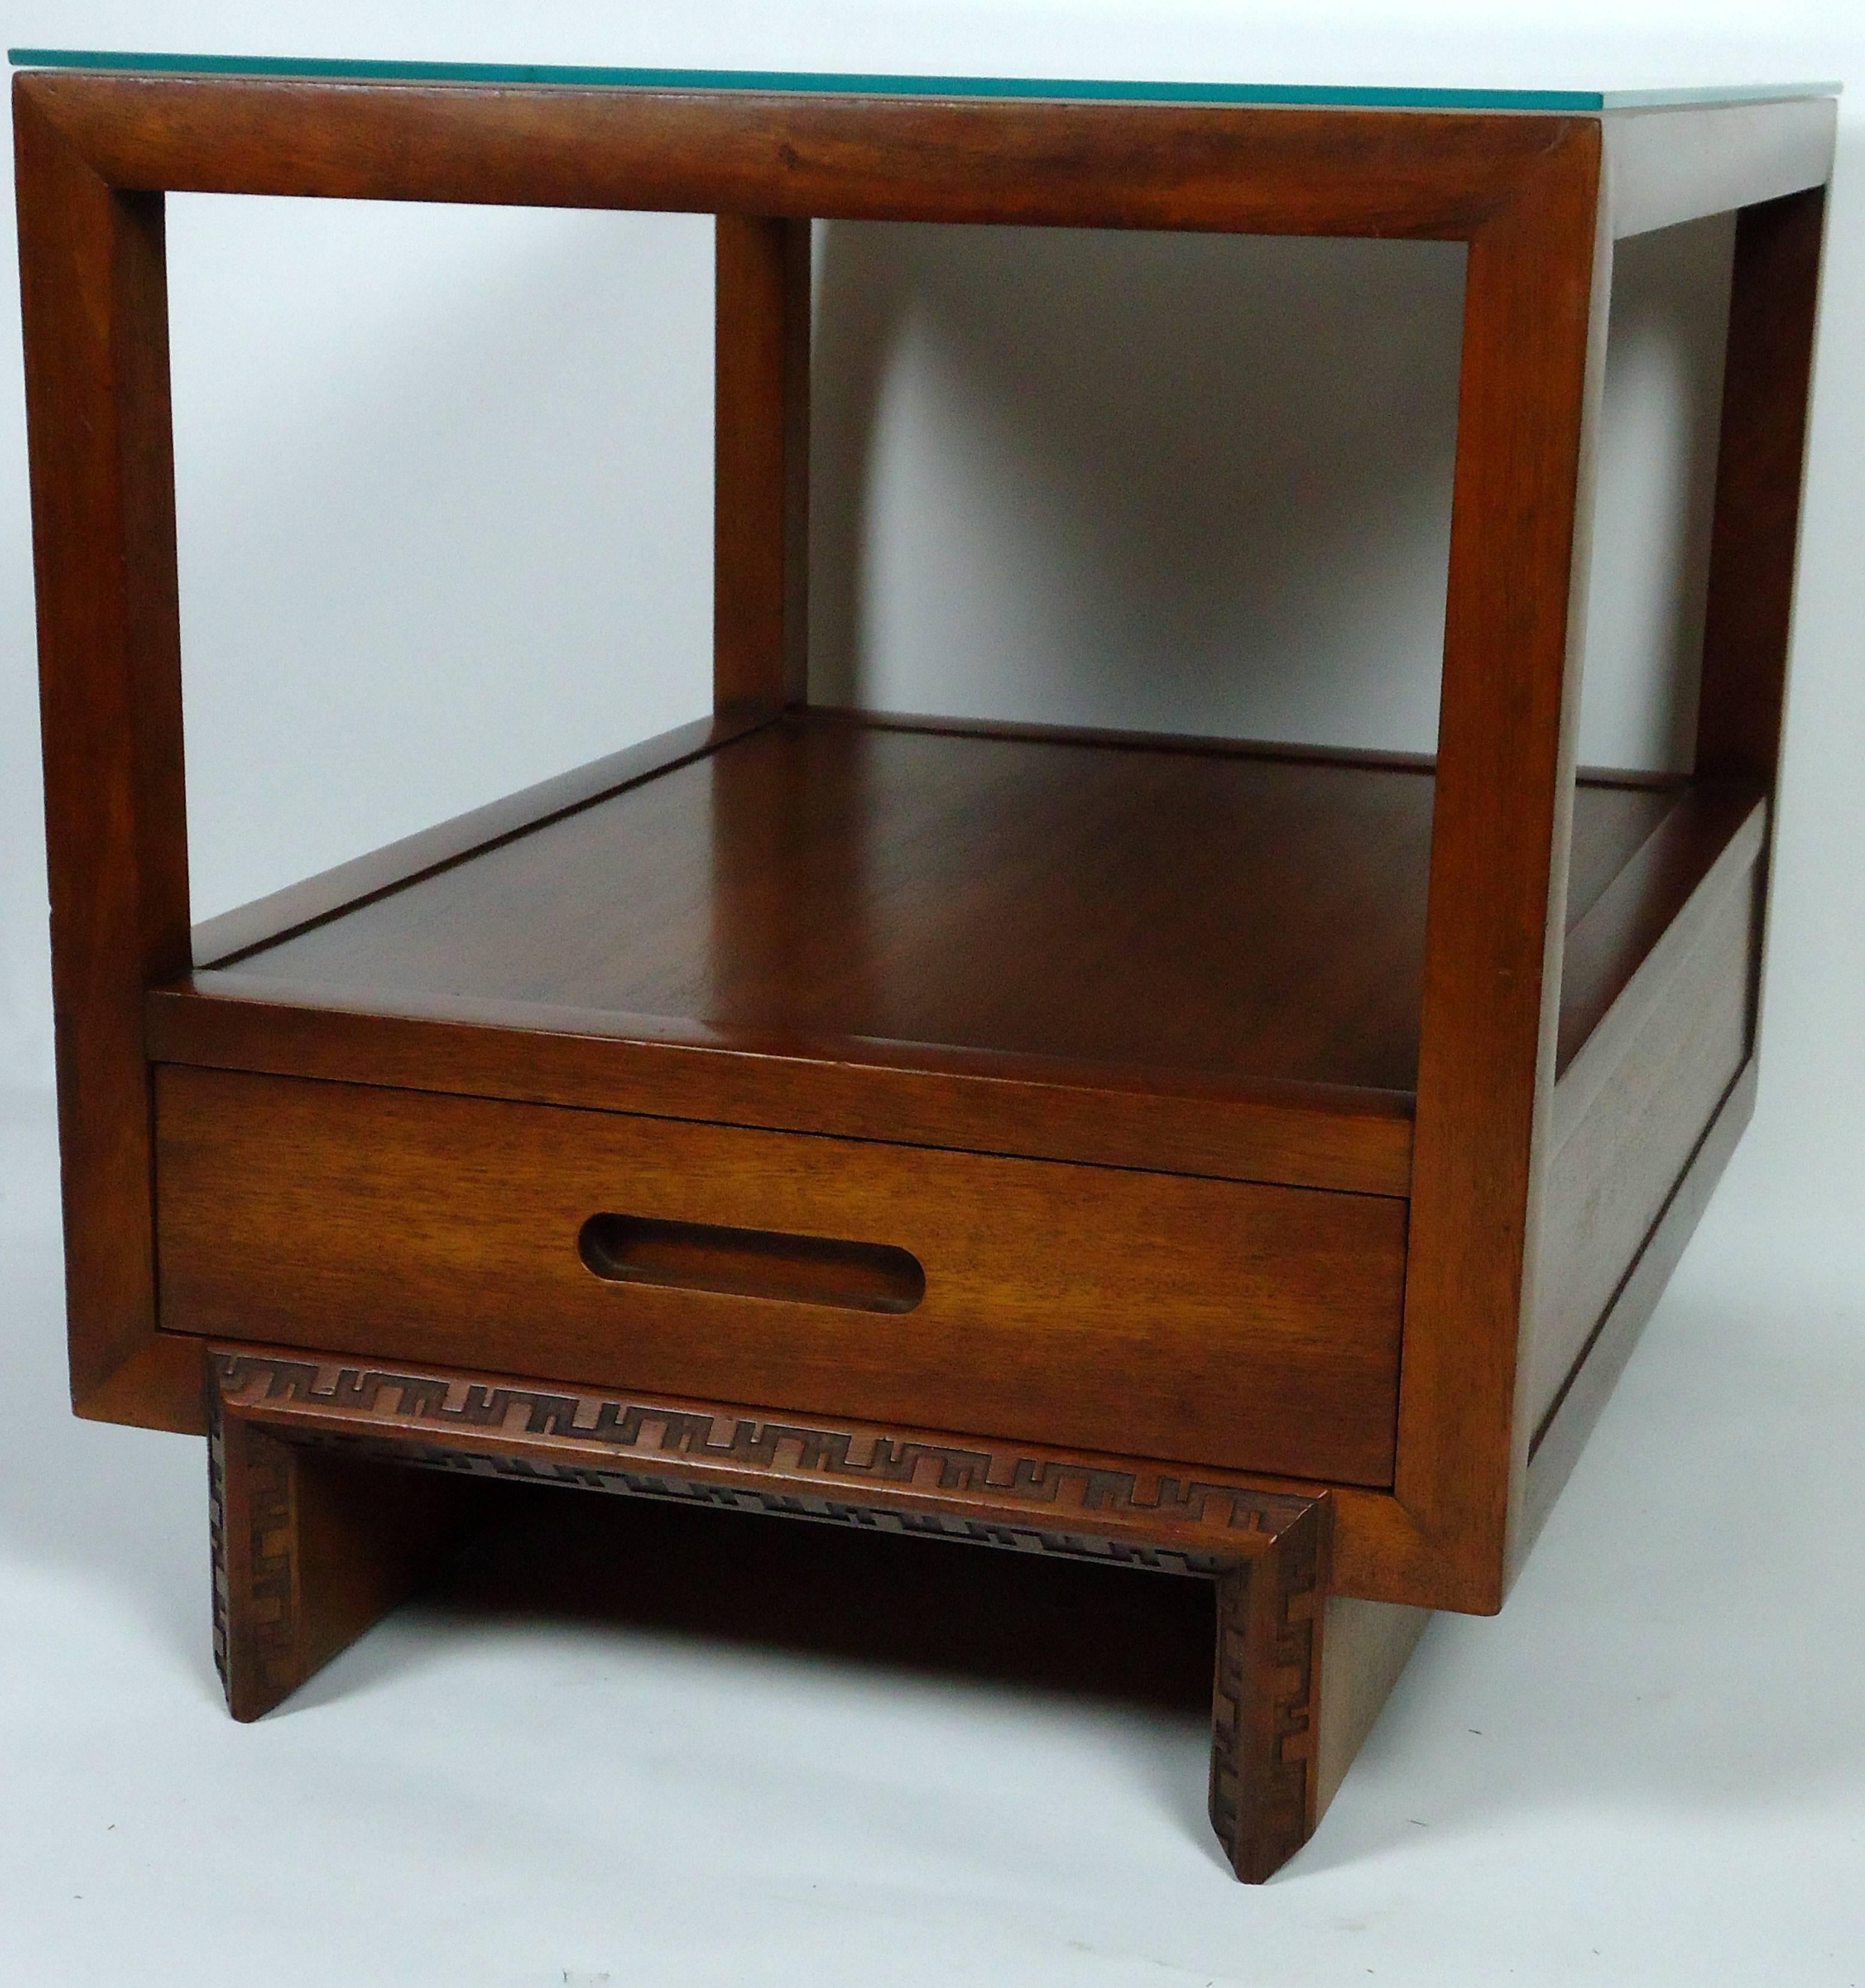 An elegant matched pair of Frank Lloyd Wright mahogany veneered end tables or nightstands. Manufactured i September of 1955 by Henredon Heritage model 450-E part of Wright's Taliesin line.
Both pieces are stamped with the Wright signature and